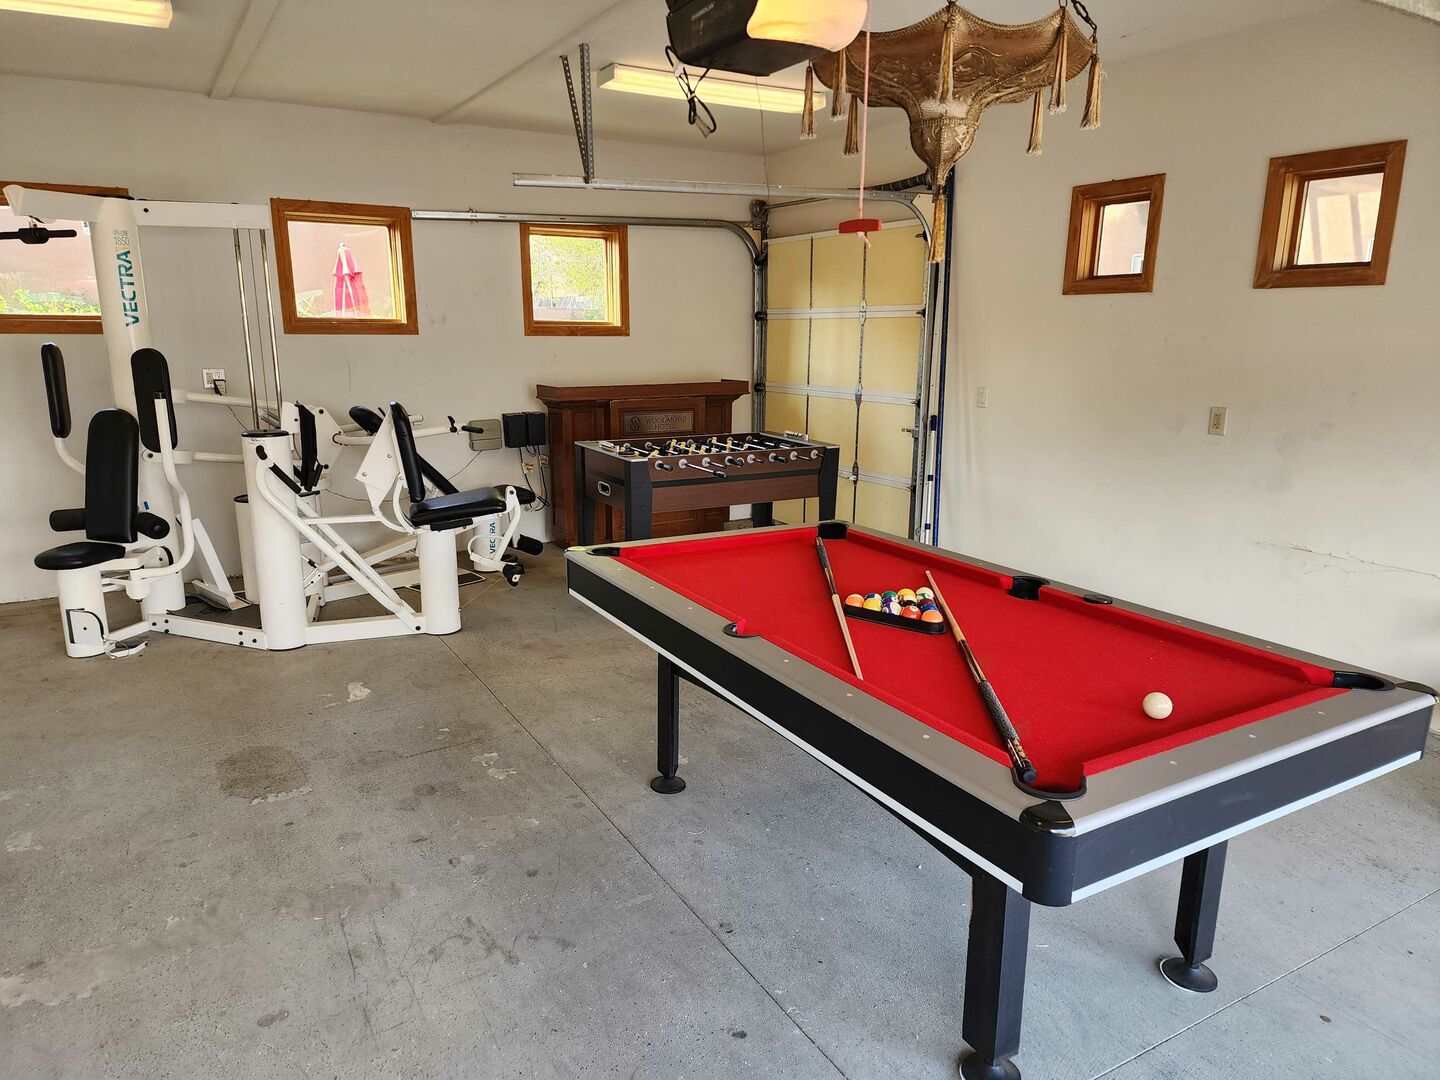 Practice your skills at the Billiard table!